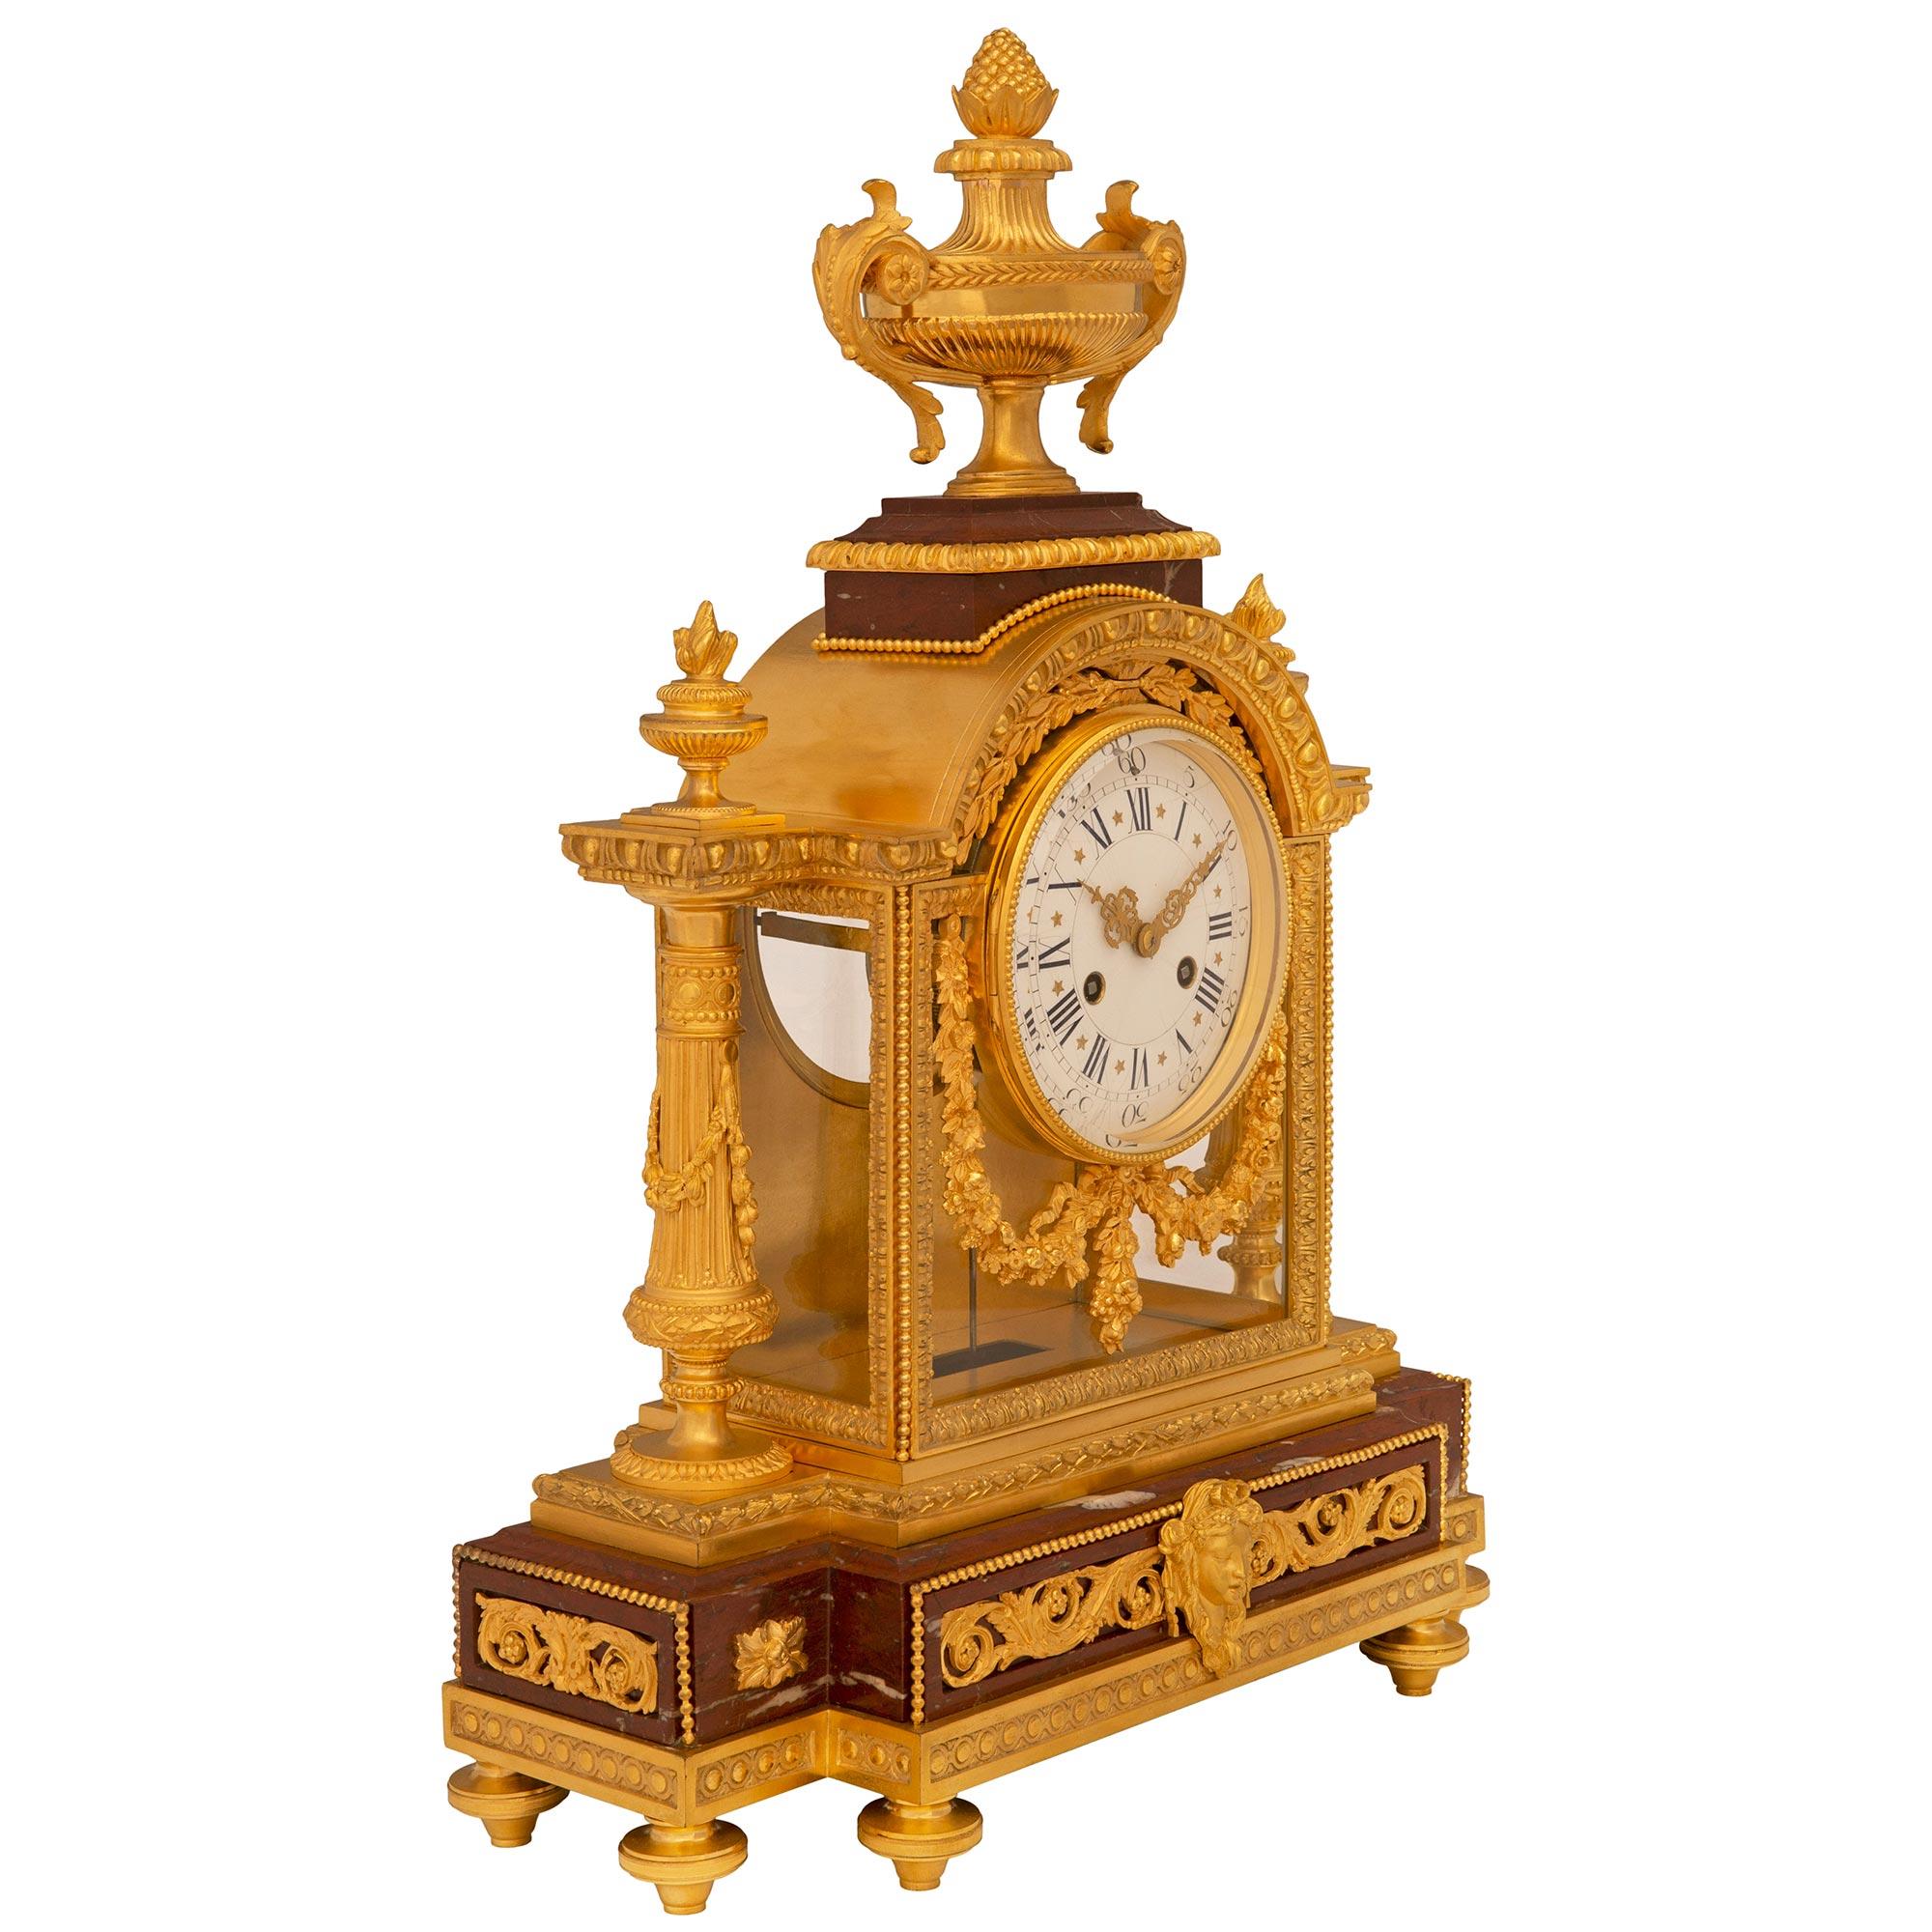 A French 19th century Louis XVI st. clock signed Le Merle Charpentier Bronzier  In Good Condition For Sale In West Palm Beach, FL